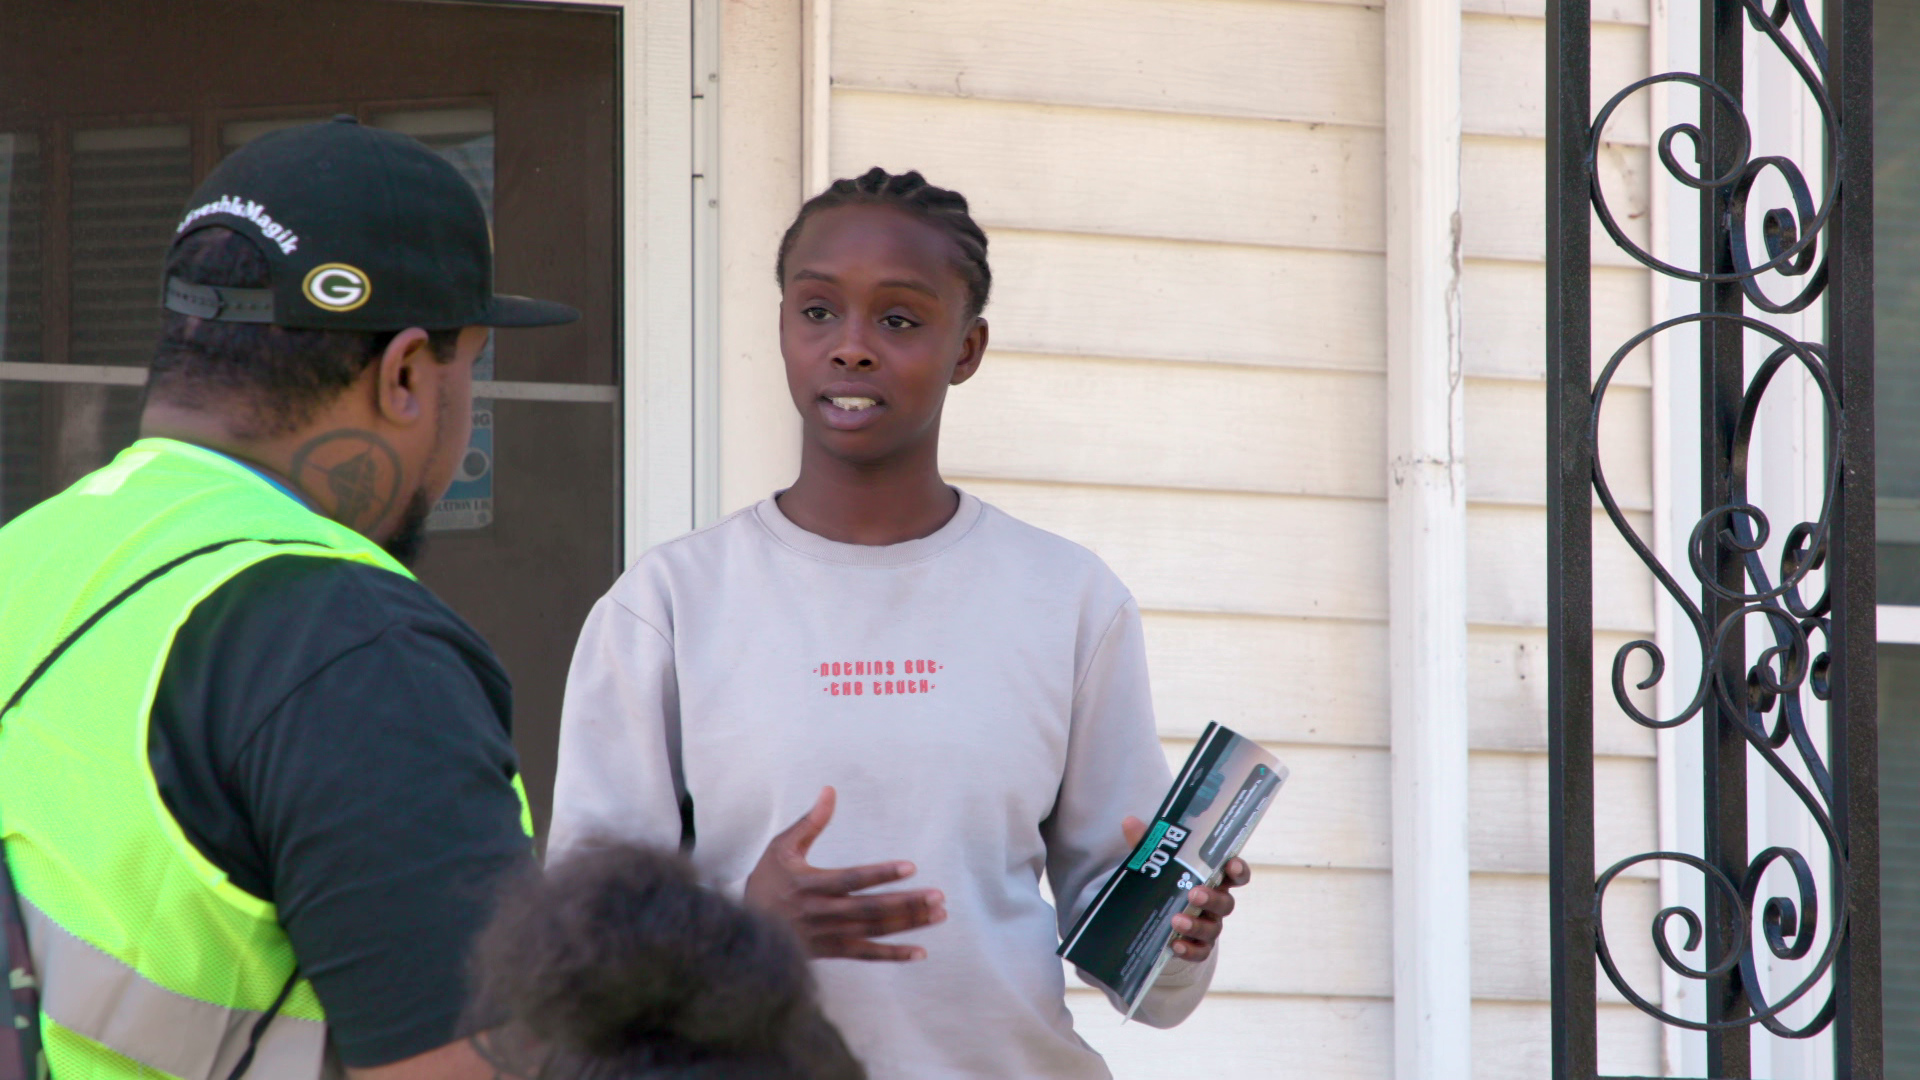 Miracle Holmes stands outside the front door of a house while gesturing with her hands and speaking two two people on its steps.